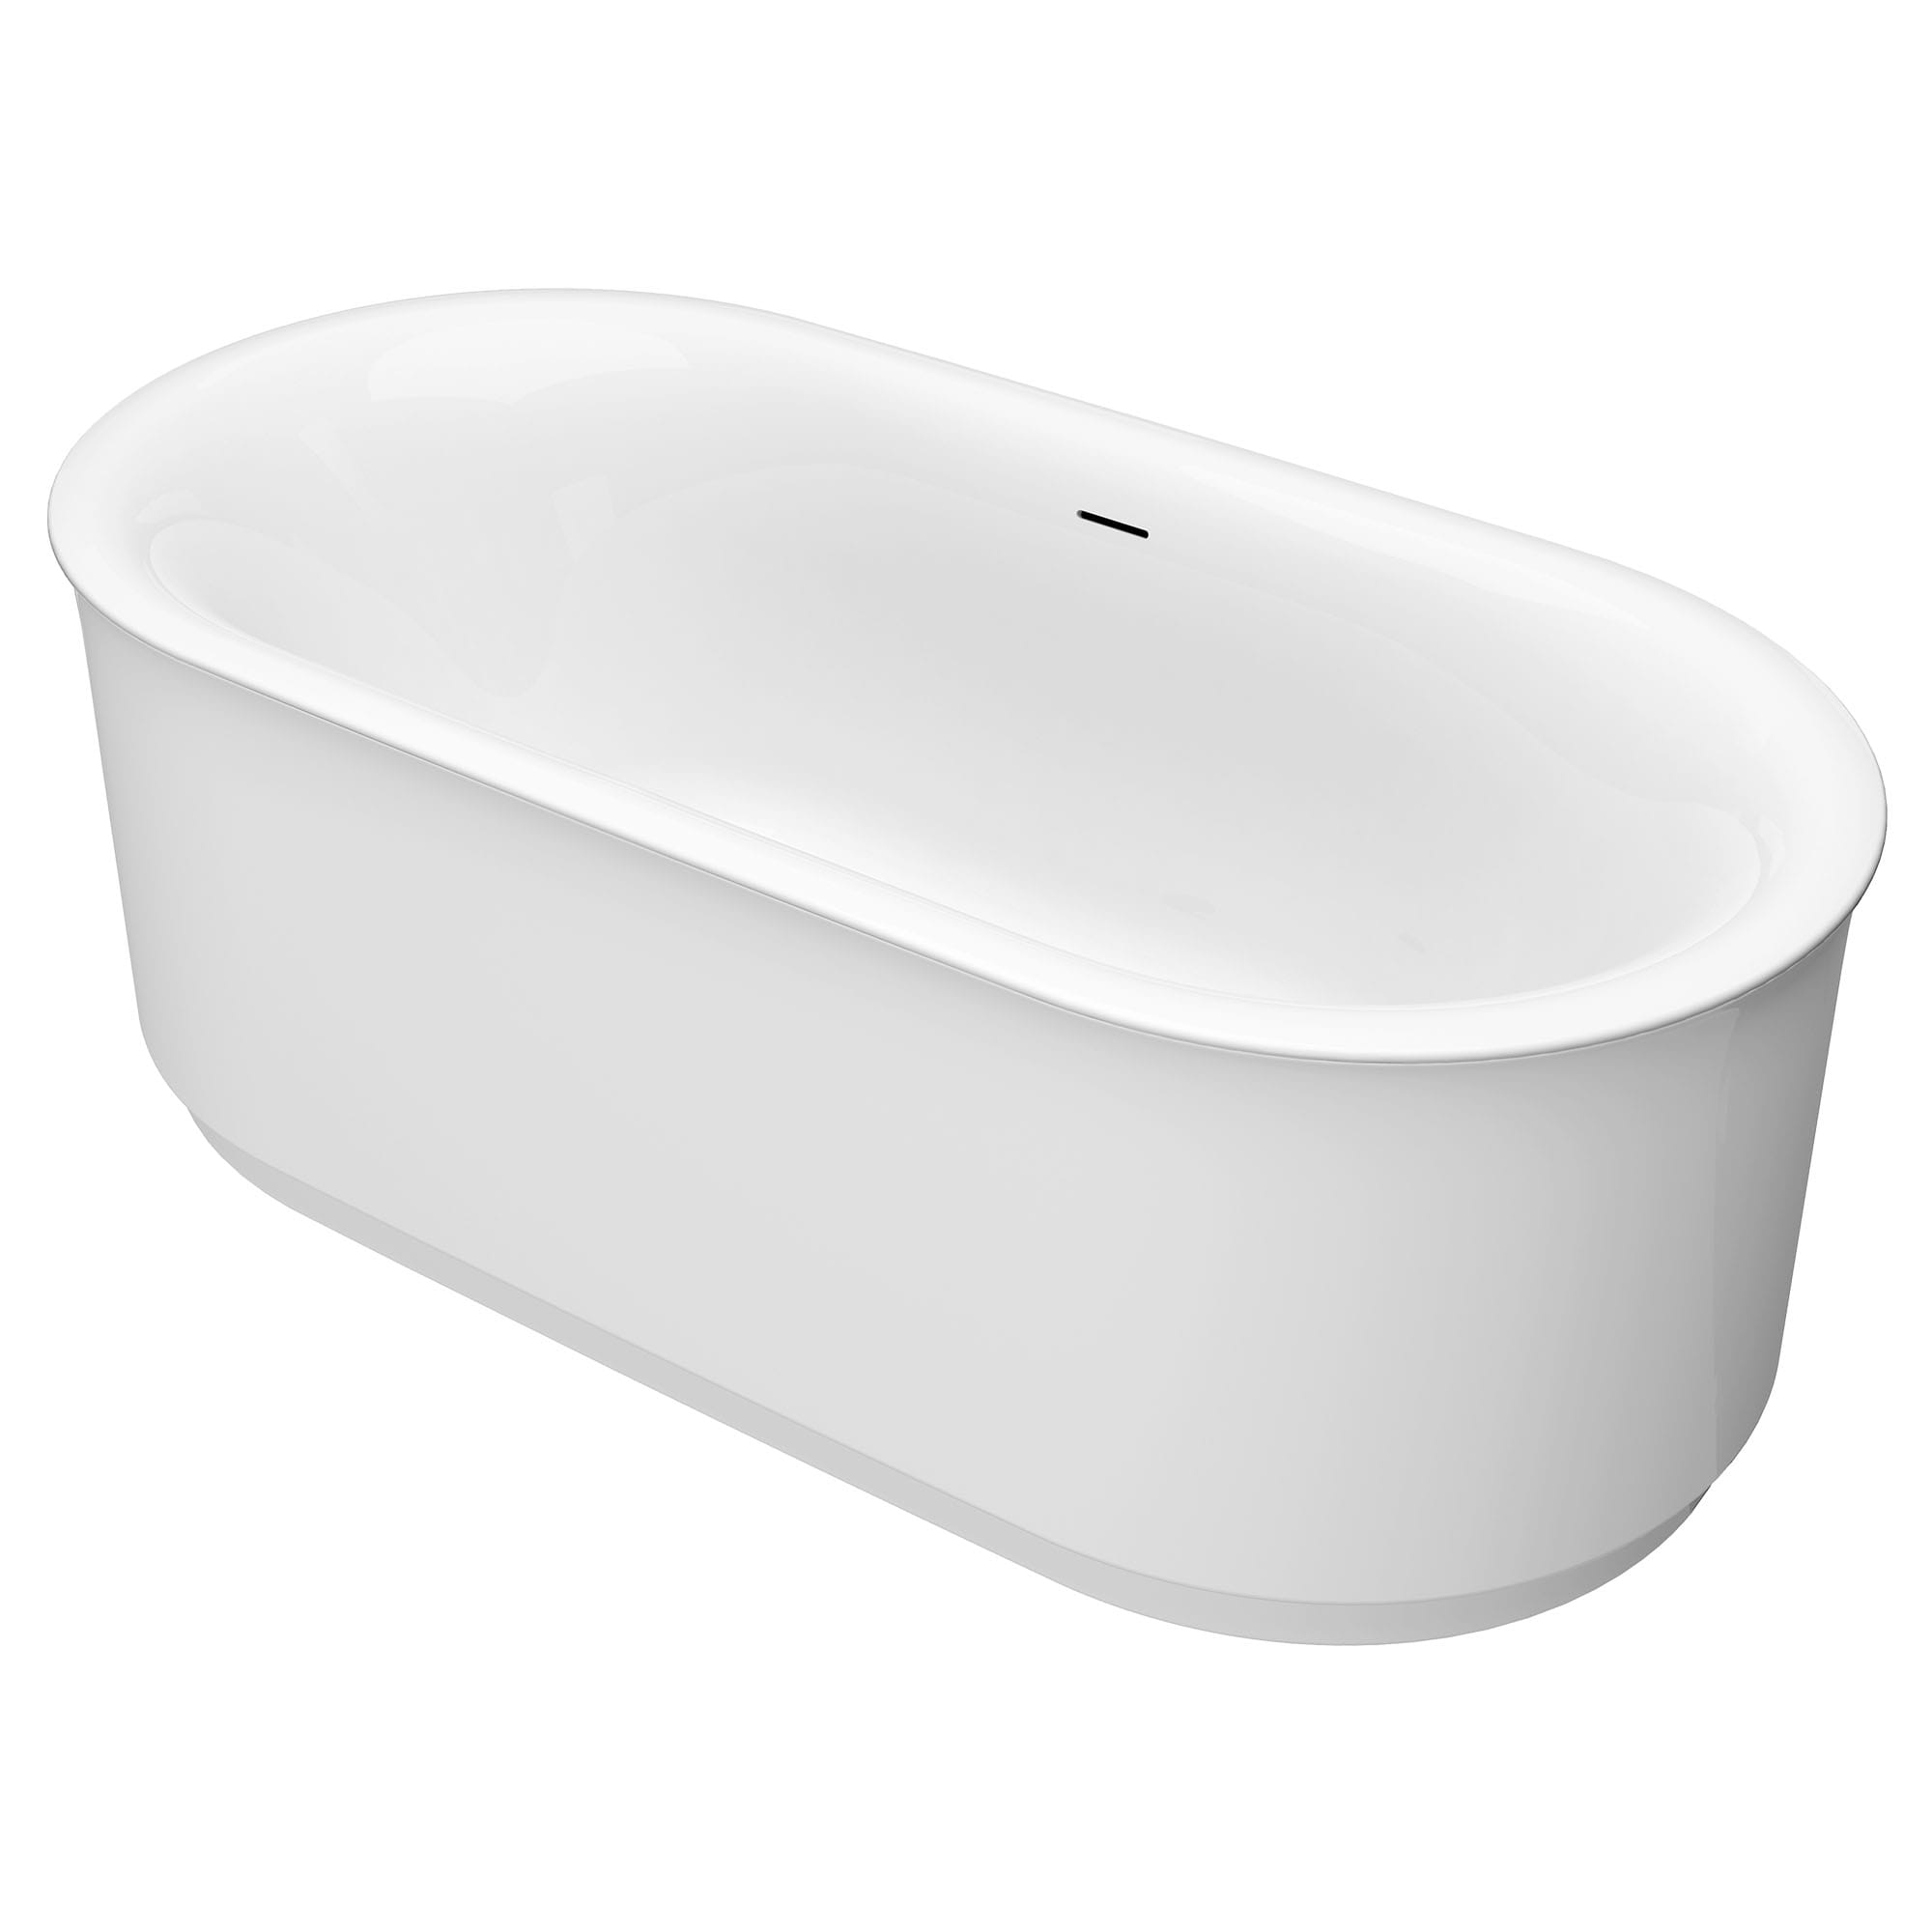 Studio S 68 x 34 Inch Freestanding Bathtub Center Drain With Integrated Overflow WHITE